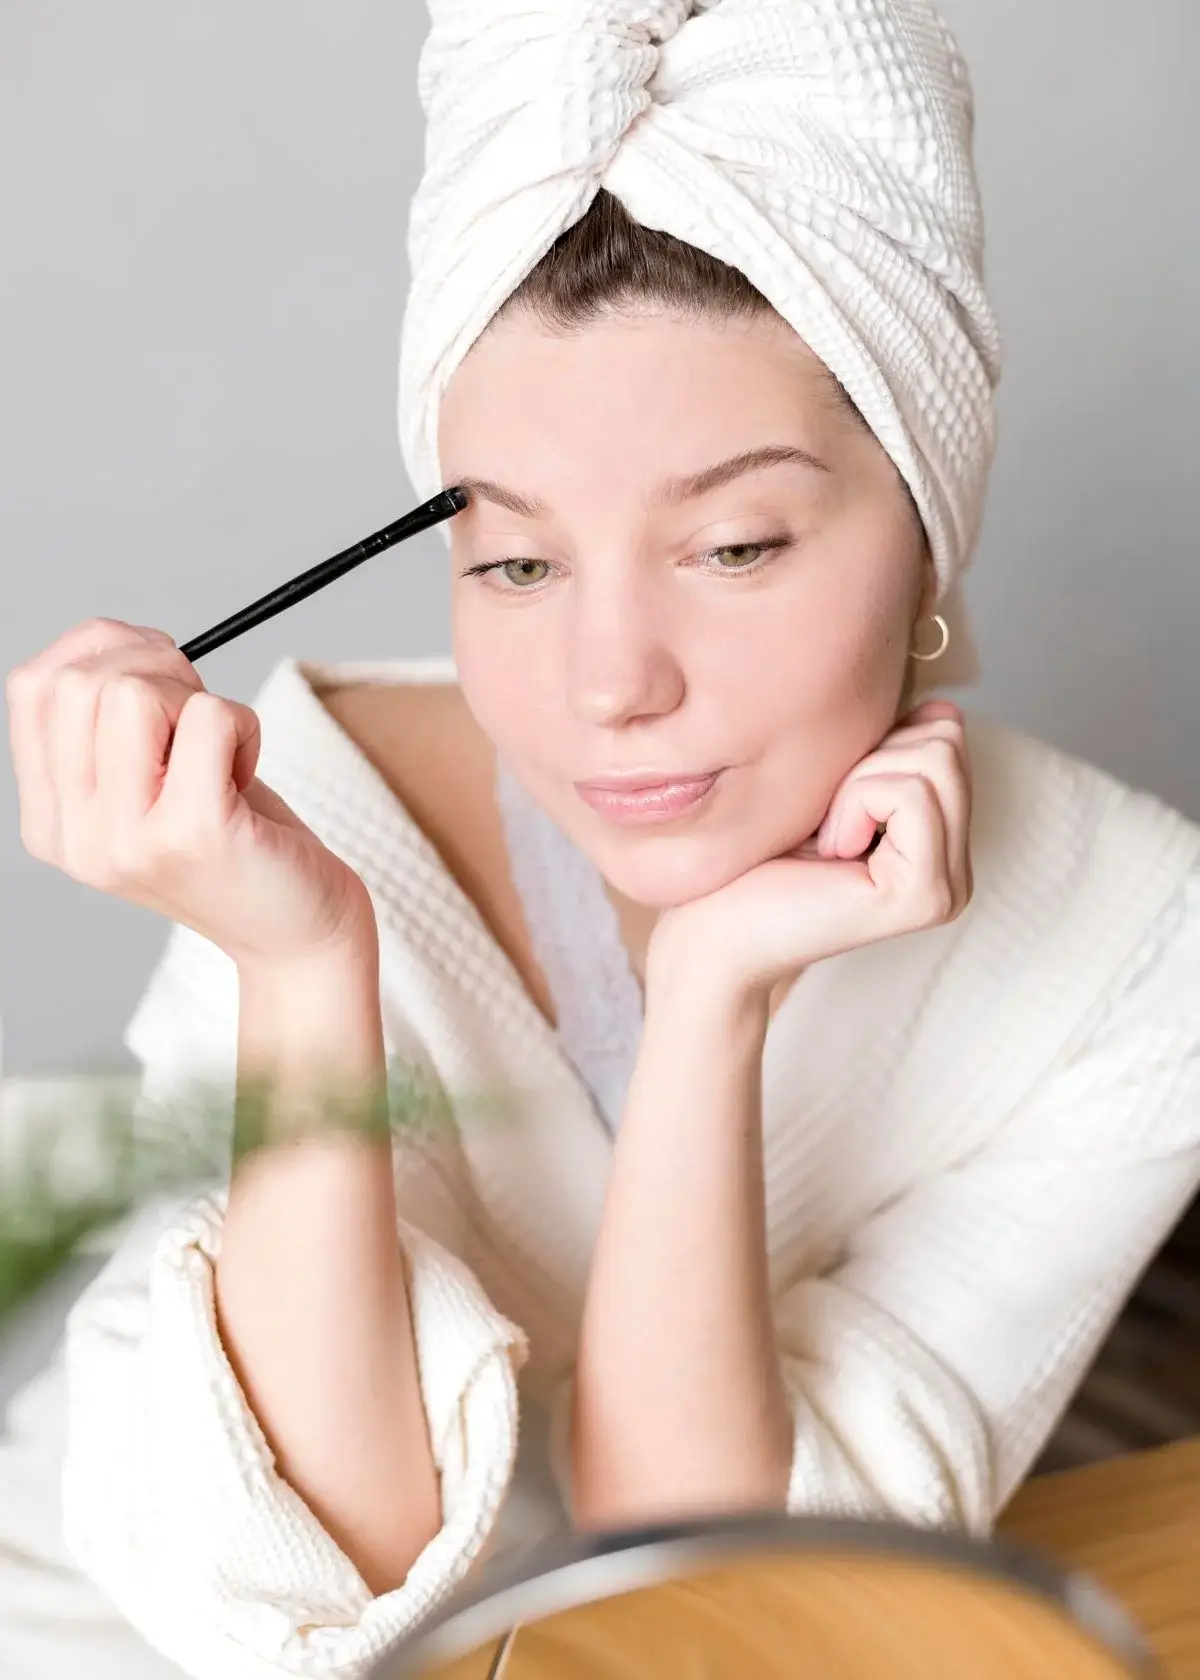 How does non-toxic mascara differ from conventional mascara?